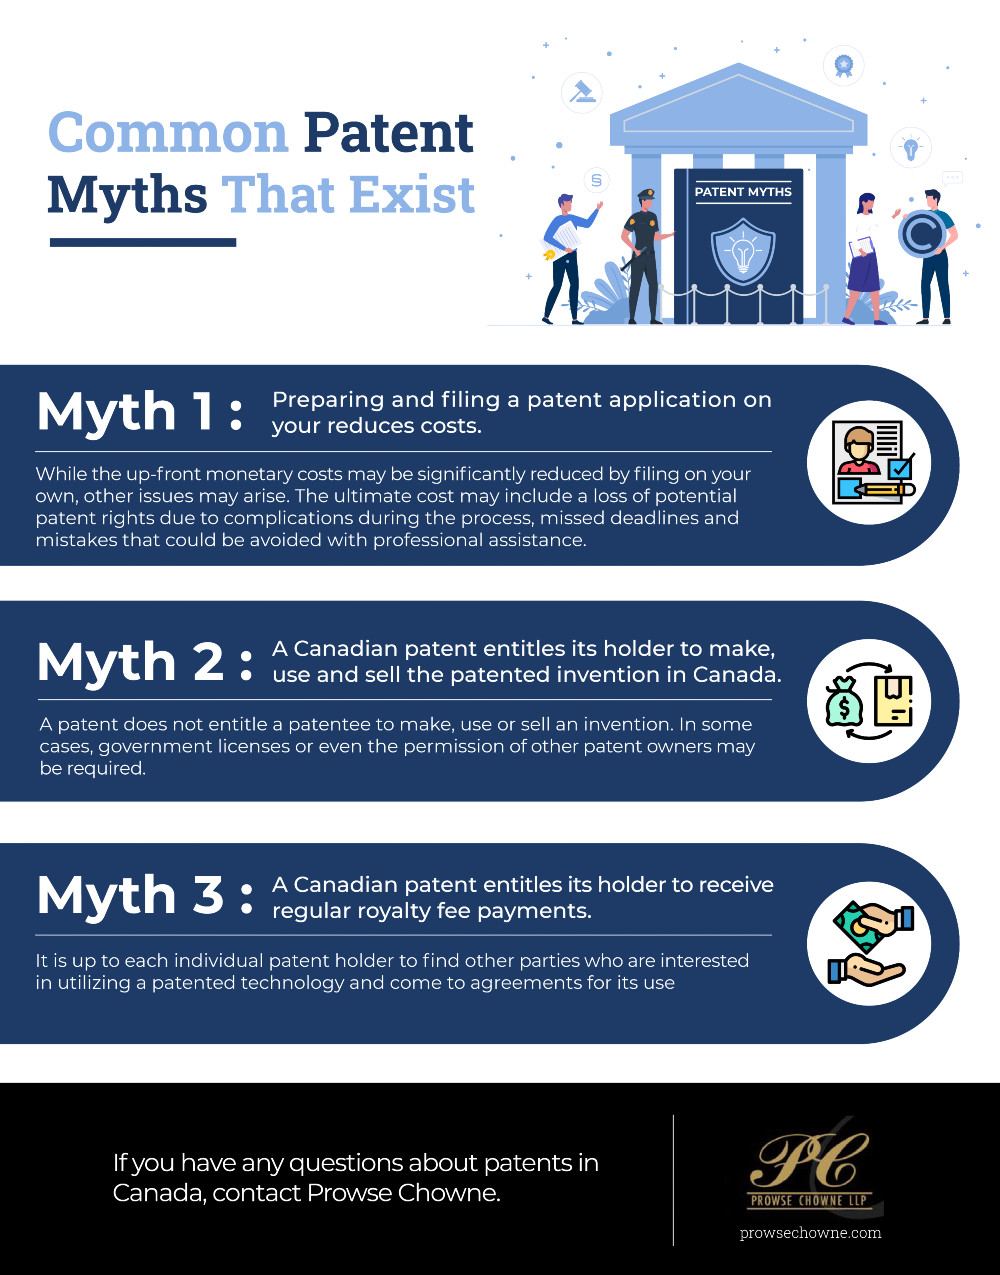 Common Patent Myths That Exist